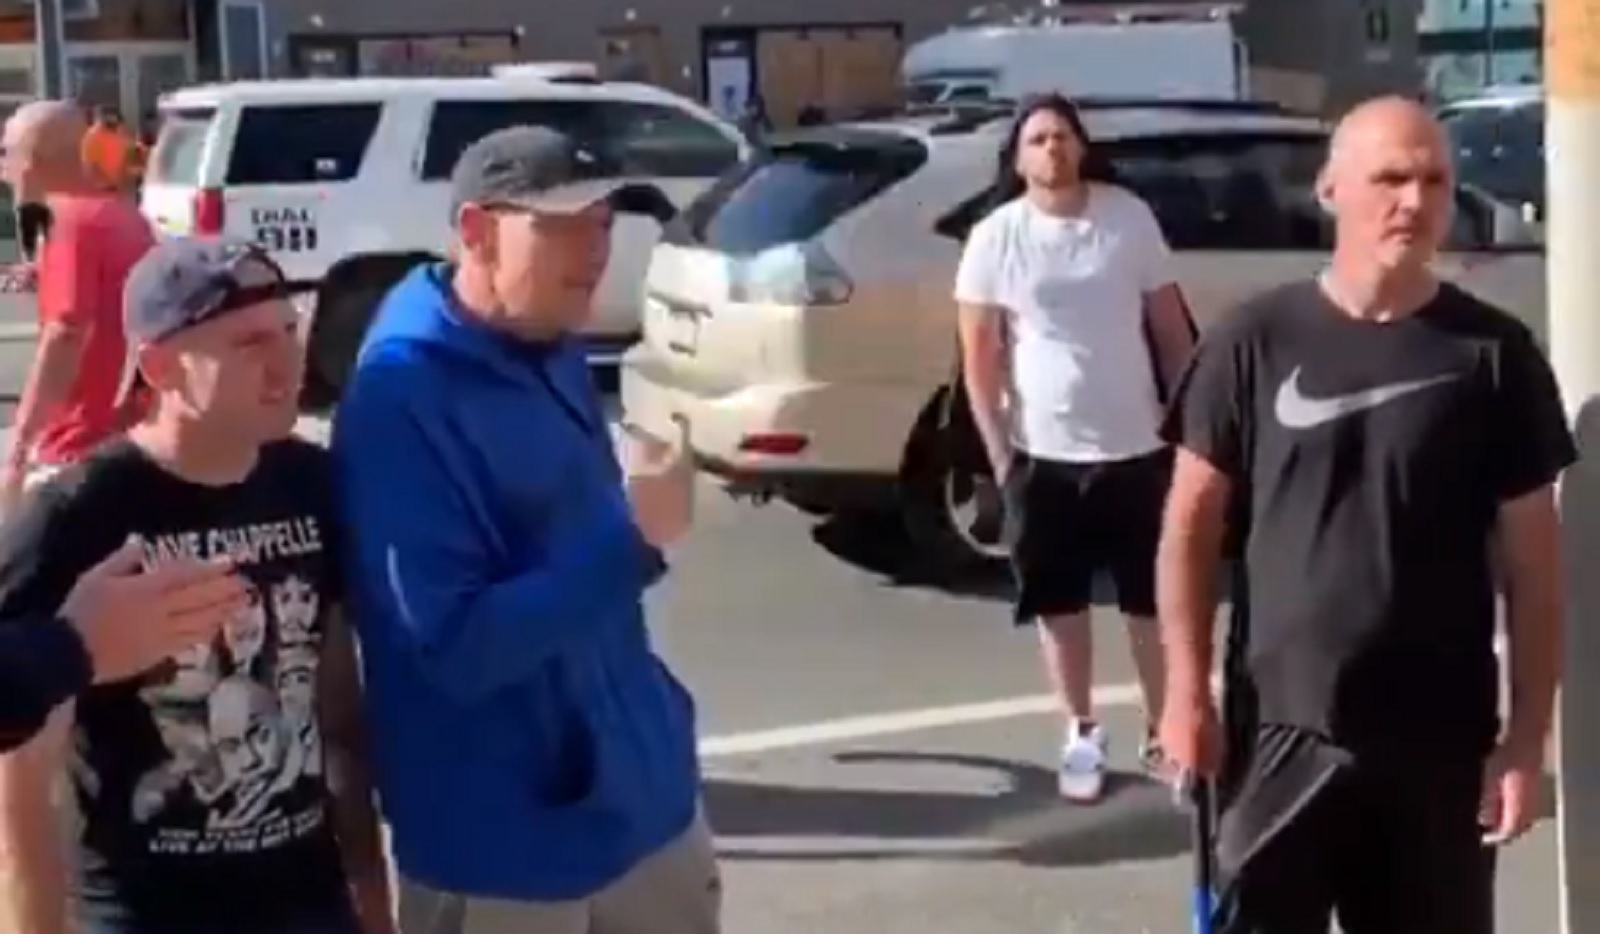 The men were caught on camera yelling at Black Lives Matter activists